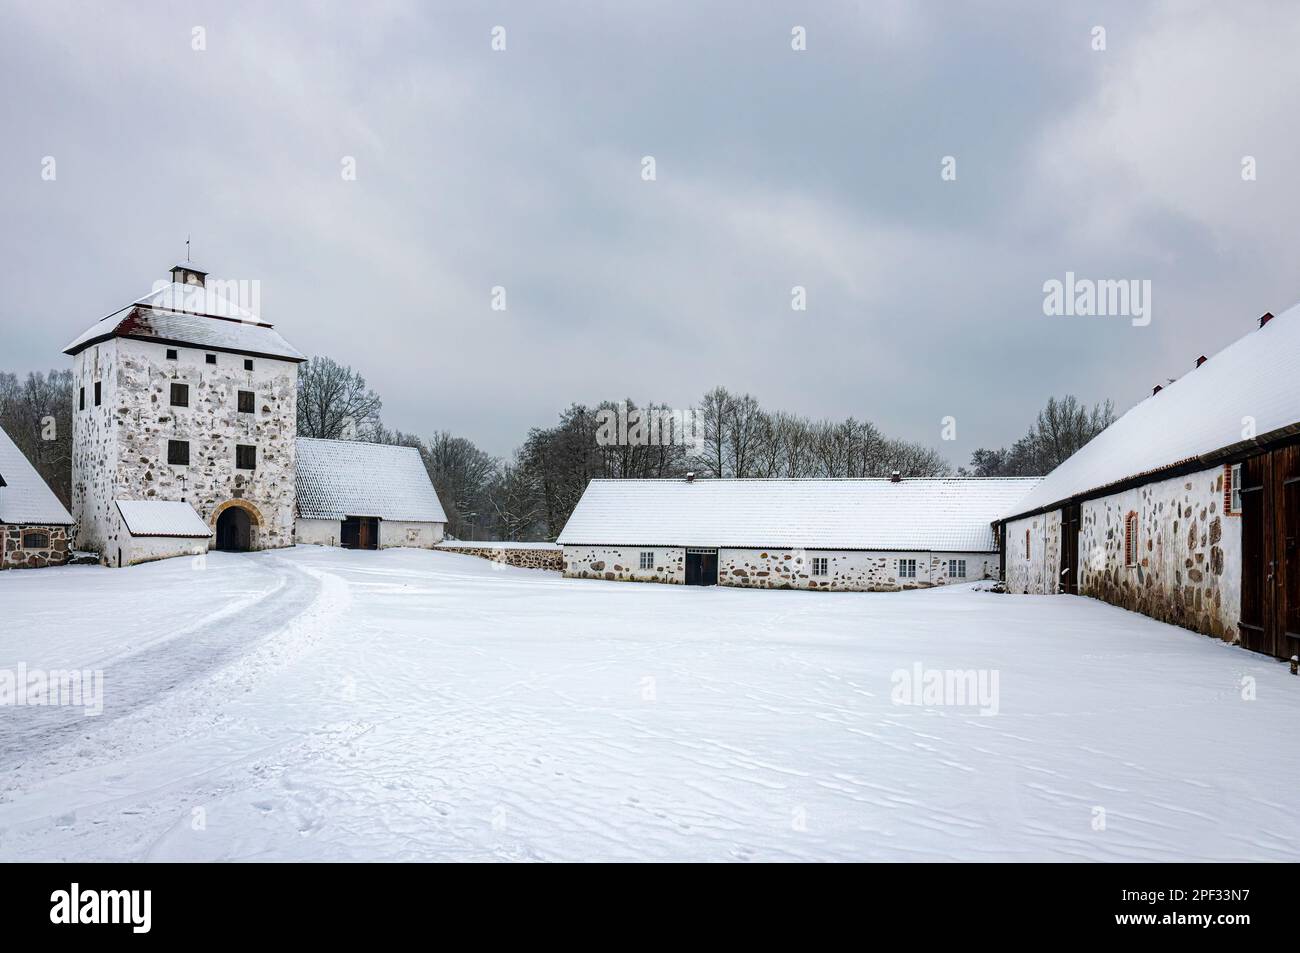 View of a snow covered Hovdala Castle in Hassleholm region. Hovdala Castle is a castle in Hassleholm Municipality, Scania, in southern Sweden. Stock Photo